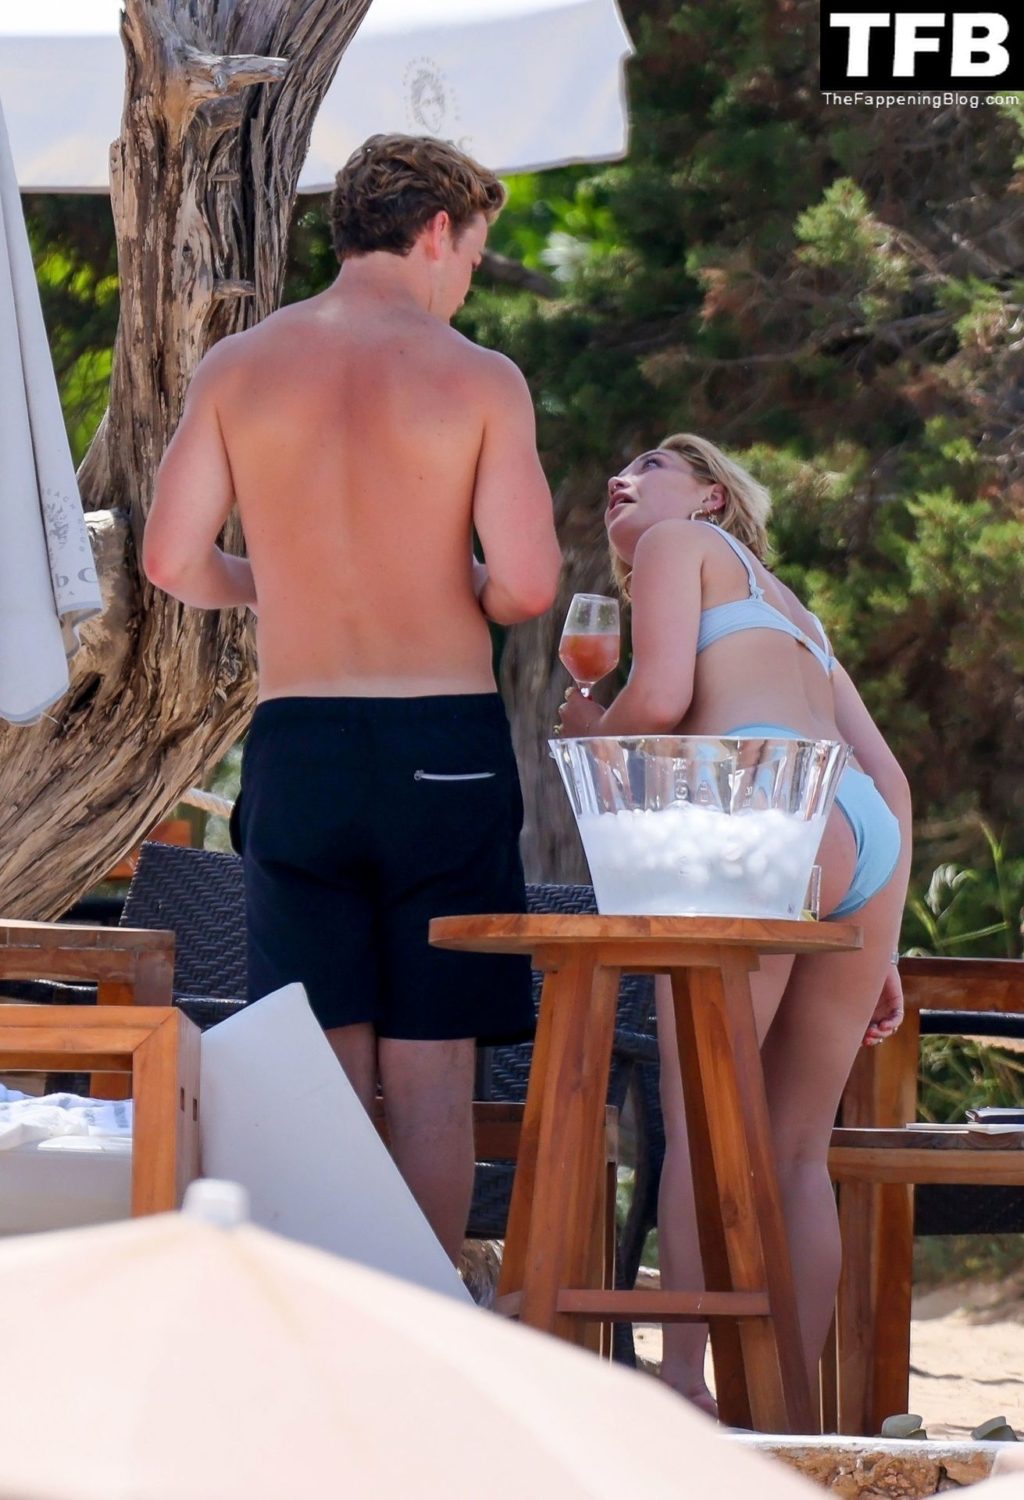 Florence Pugh Sexy The Fappening Blog 4 1024x1500 - Florence Pugh & Will Poulter Enjoy a Flirty Beach Day in Ibiza (14 Photos)